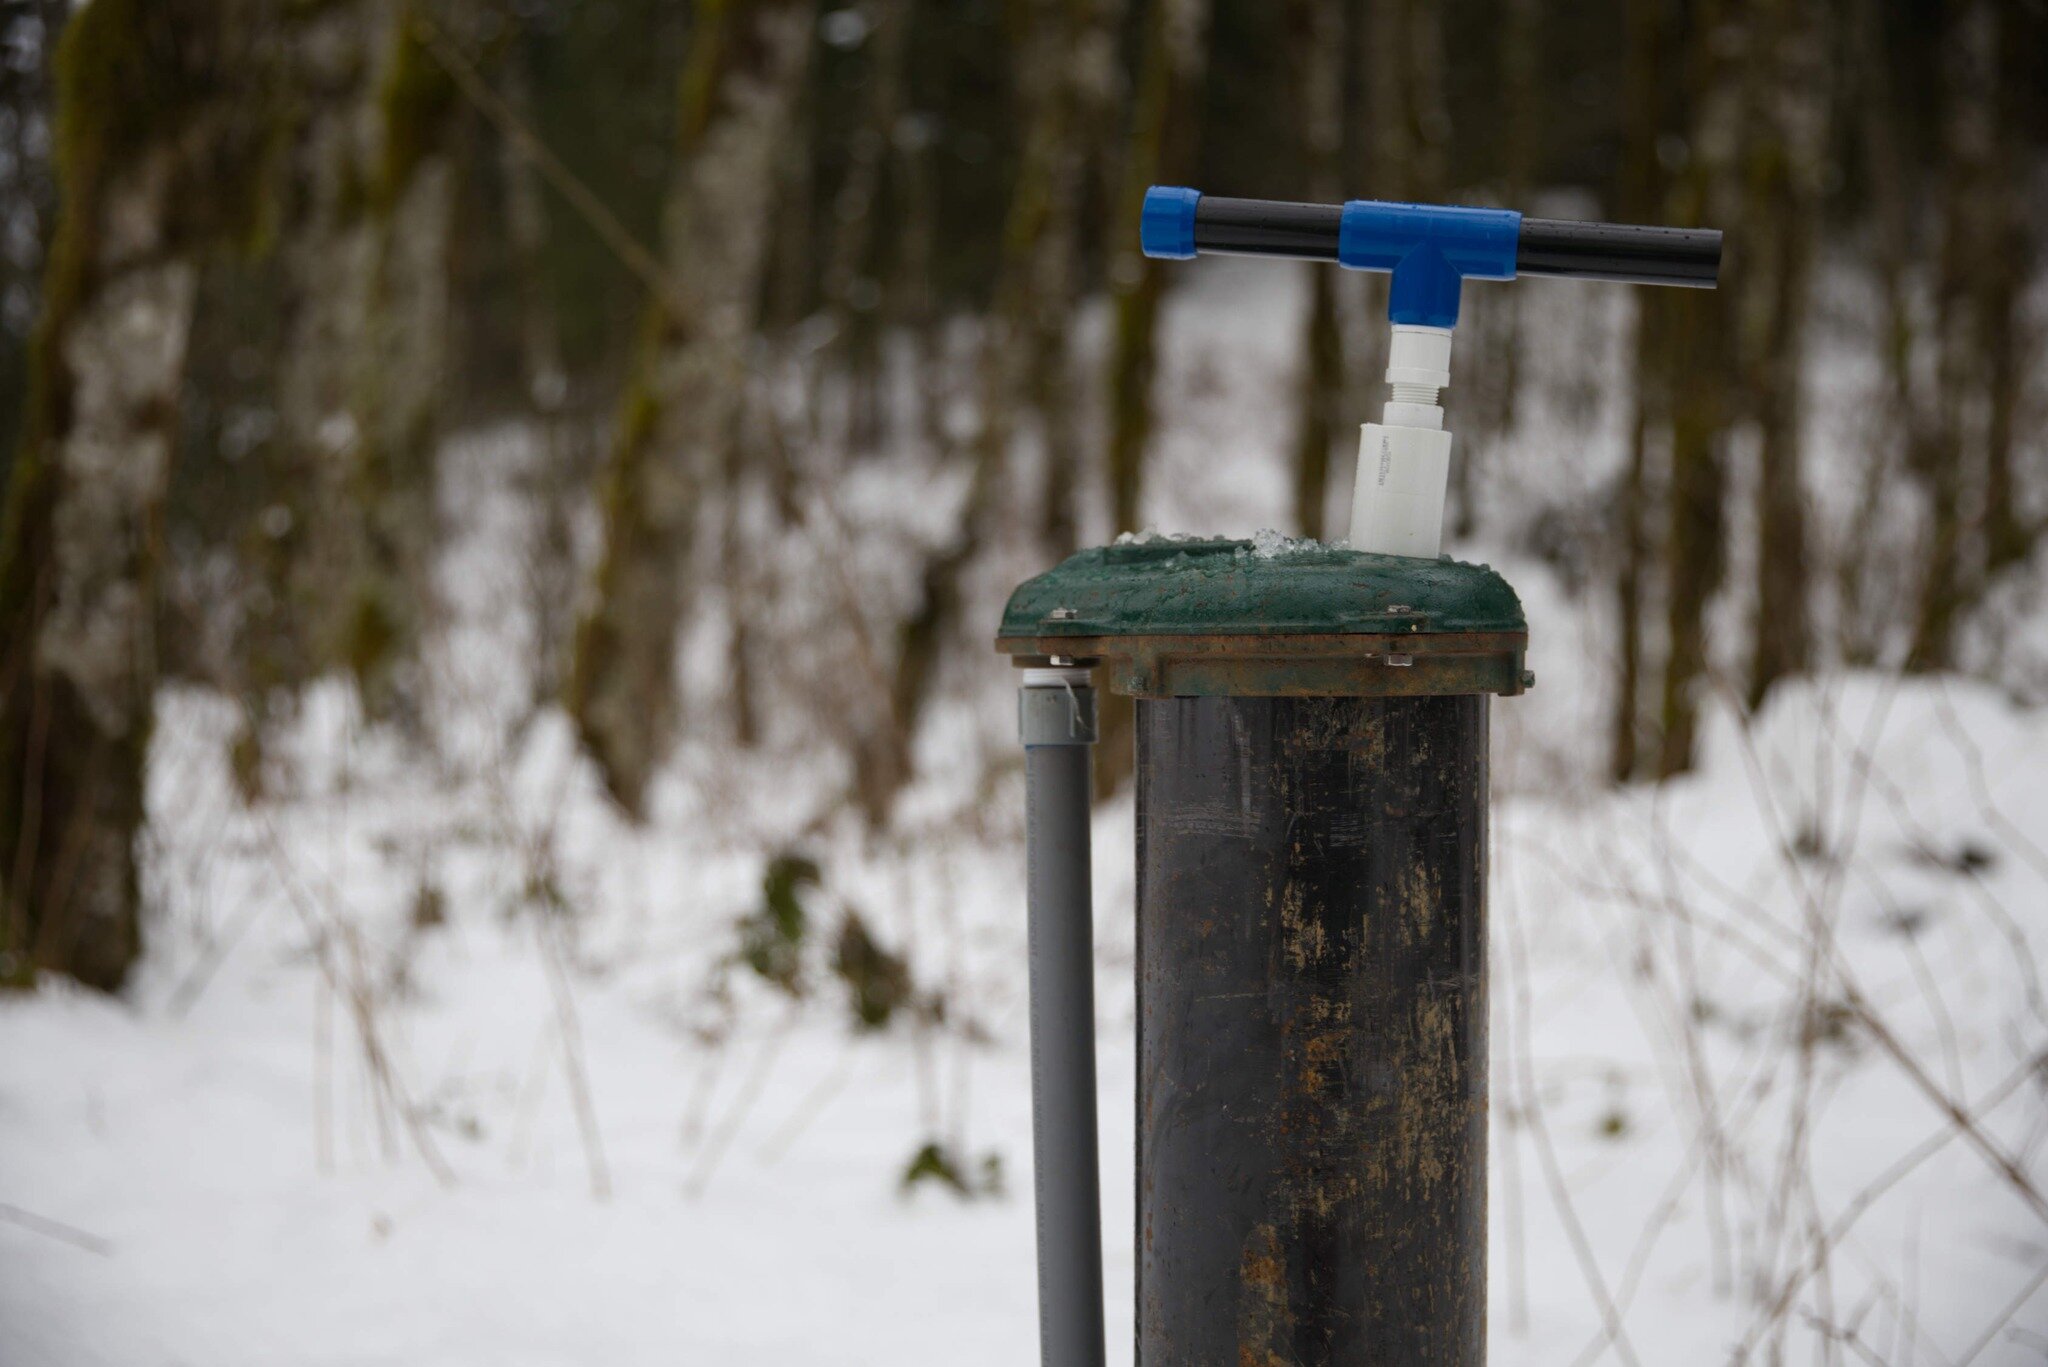 In our latest blog post, we discuss how you can keep your well hand pump from freezing in the winter. Read the full article here: pump.eppwellsolutions.com/blog/how-to-winterize-a-well-hand-pump